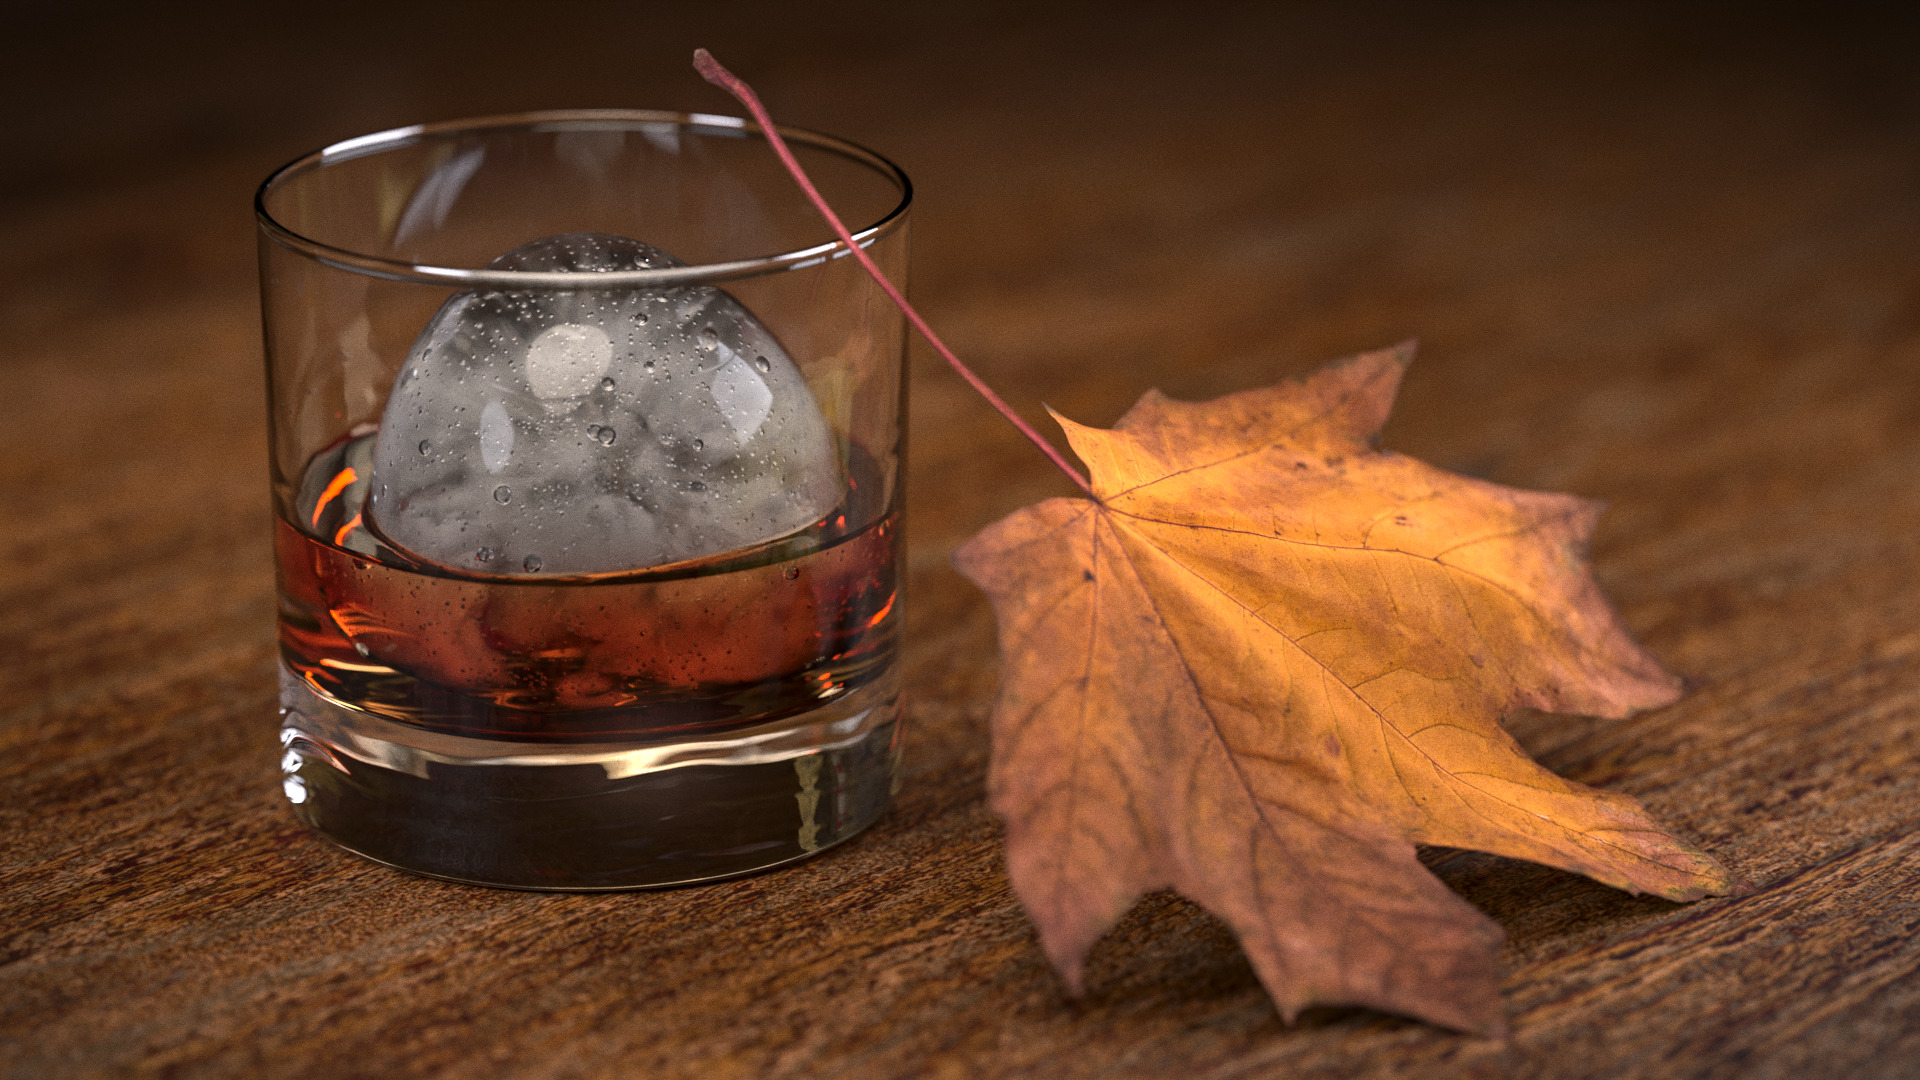 Whiskey Ice Ball - Finished Projects - Blender Artists Community